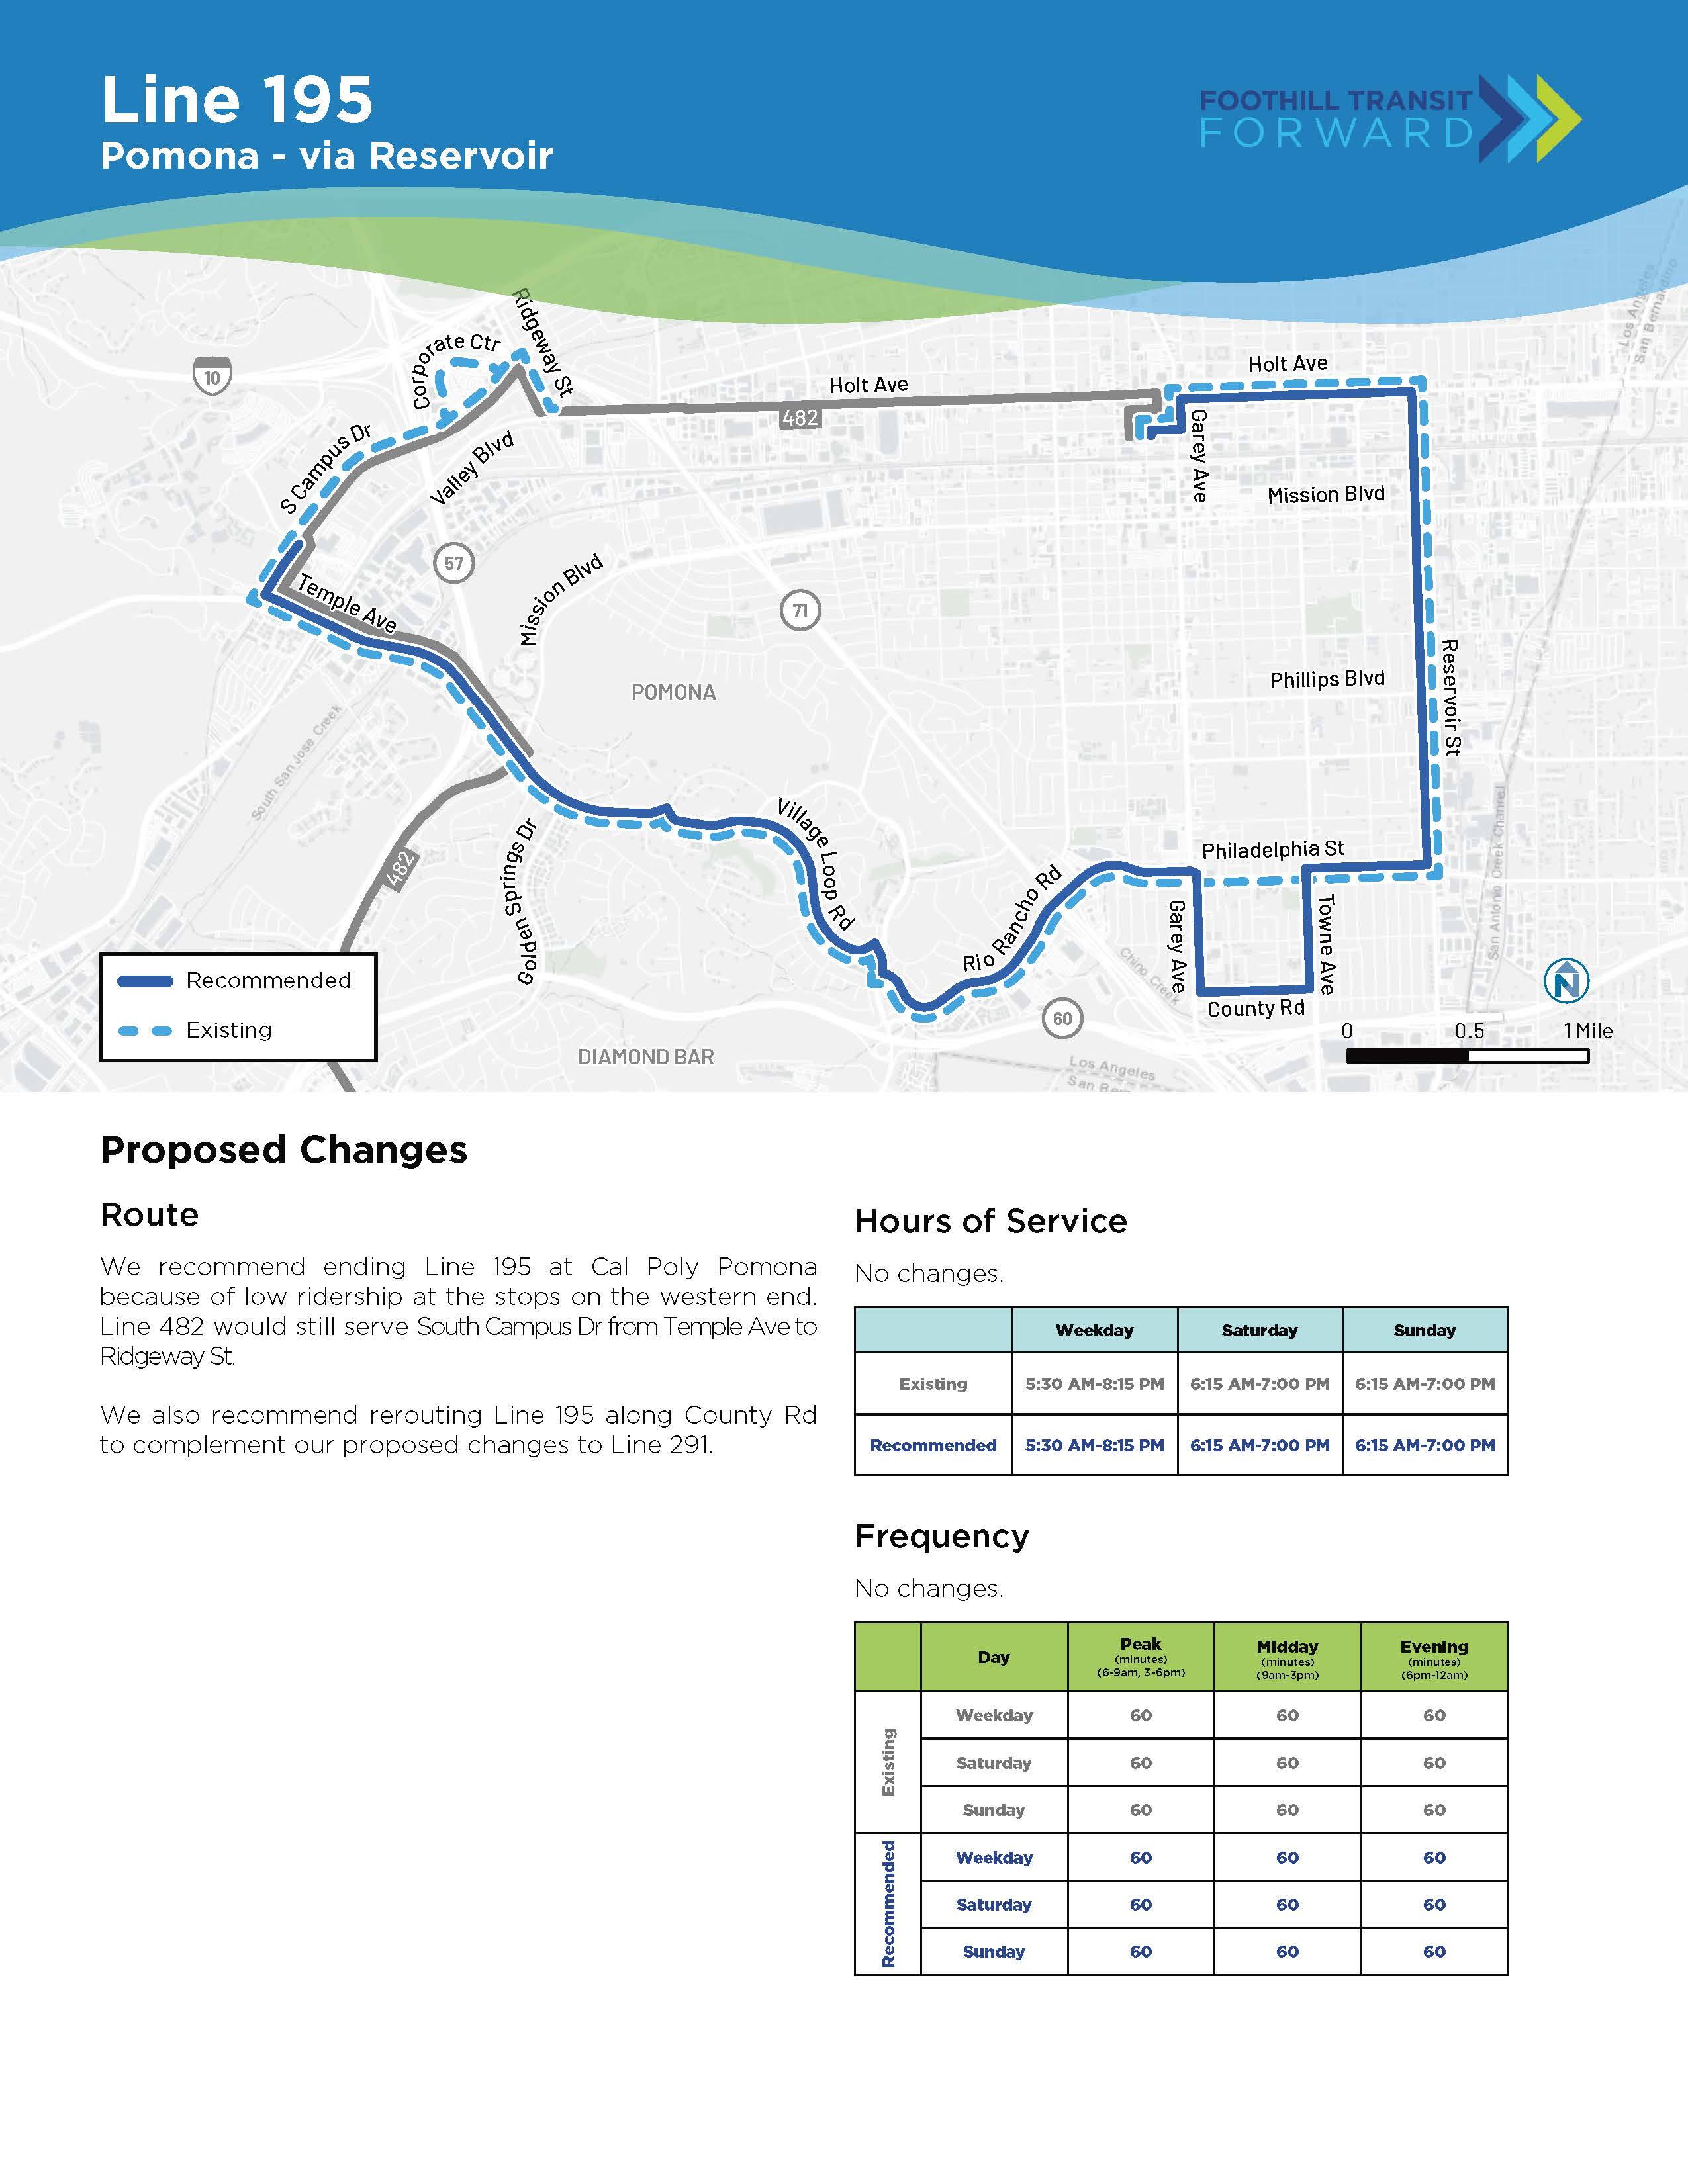 Proposed Changes Coverage Due to low ridership, the western end of Line 195 would be shortened to Cal Poly Pomona. Line 482 would continue to serve the Corporate Center Drive vicinity. In conjunction with a proposed reroute of Line 291 to serve the Pomona Ranch Walmart, Line 195 would be changed to serve S Garey Avenue, E County Road, and S Towne Avenue. This change would provide coverage for almost all stops currently served by Line 291. No changes to Hours of Service or frequency.